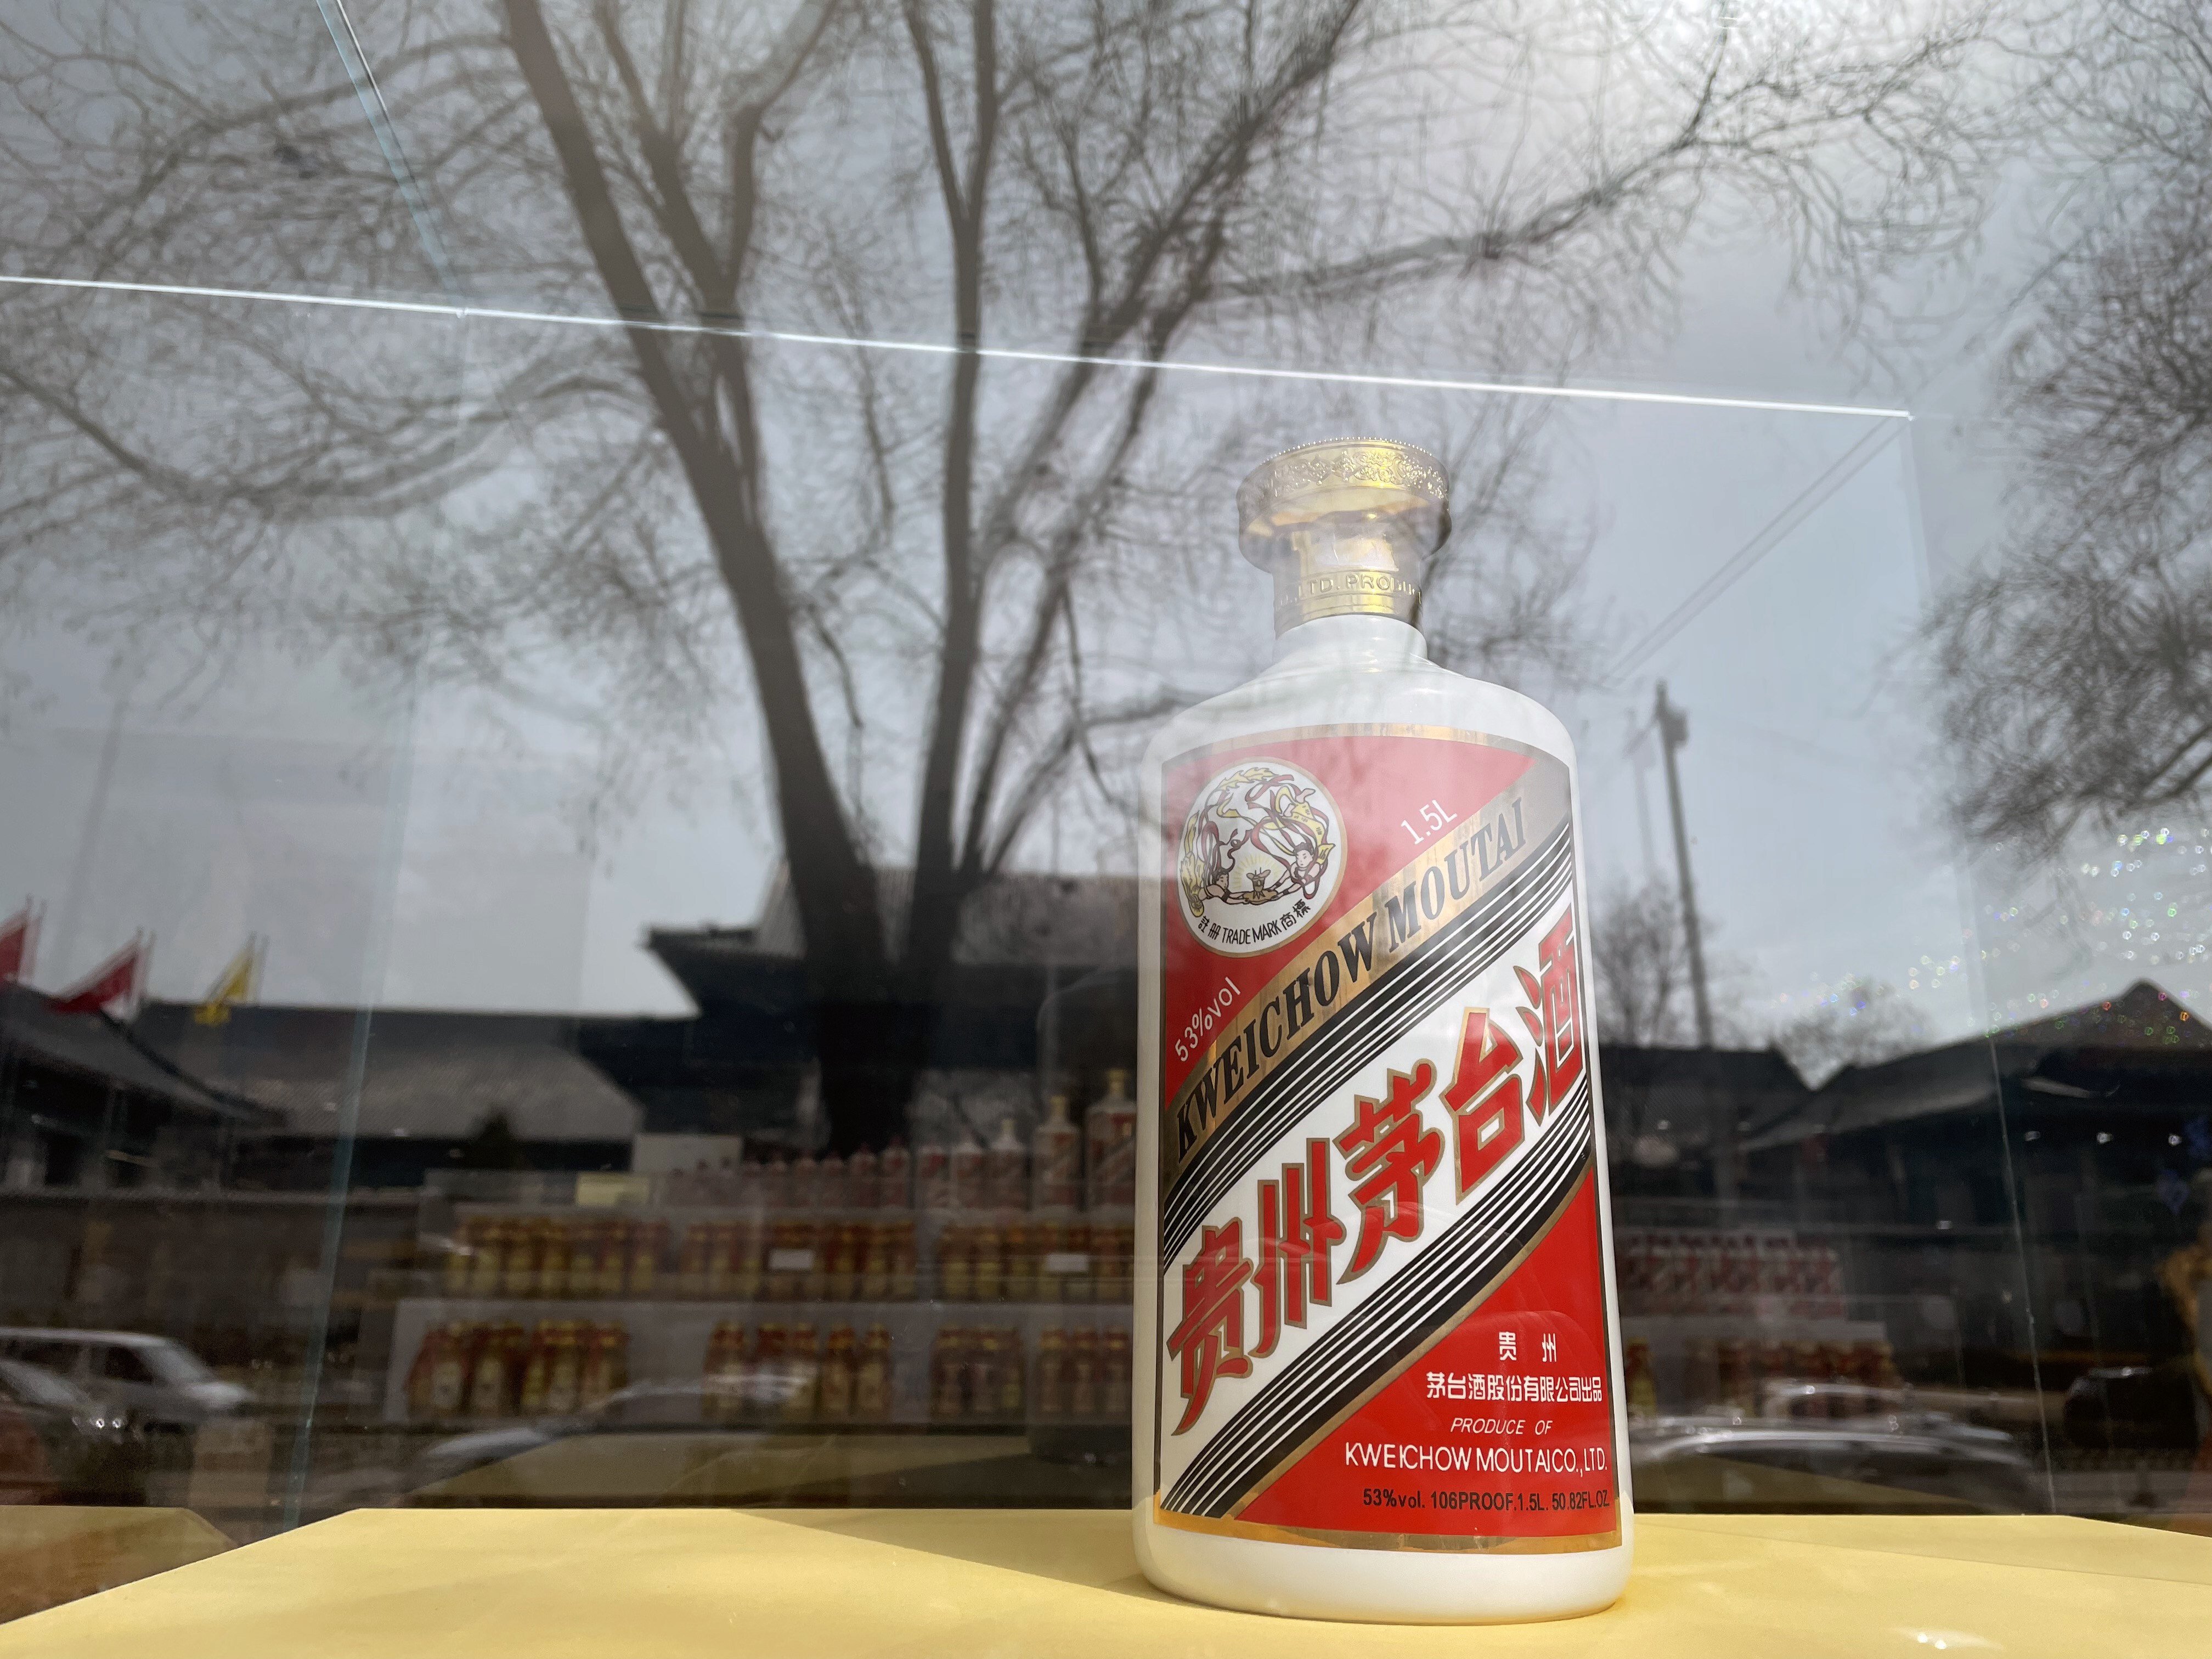 A bottle of Kweichow Moutai is displayed at a liquor store in Beijing. Photo: Simon Song